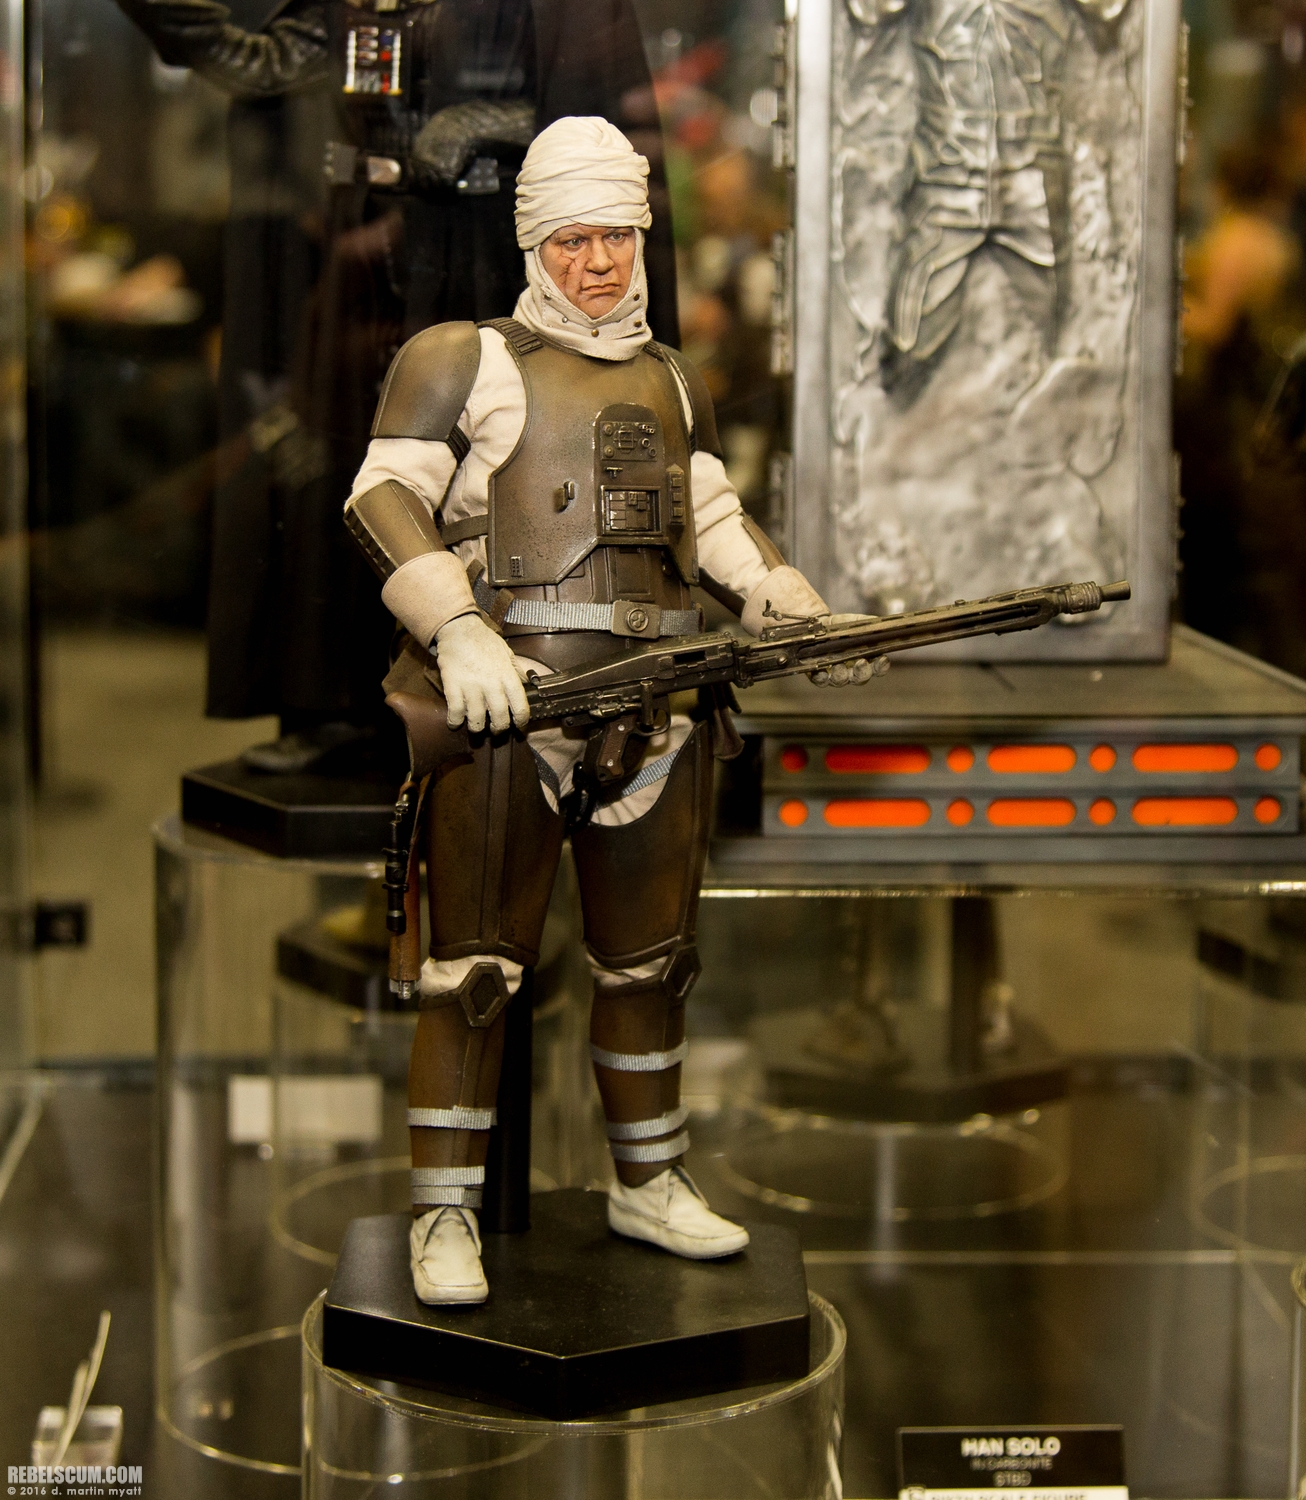 2016-SDCC-Sideshow-Collectibles-Star-Wars-046.jpg